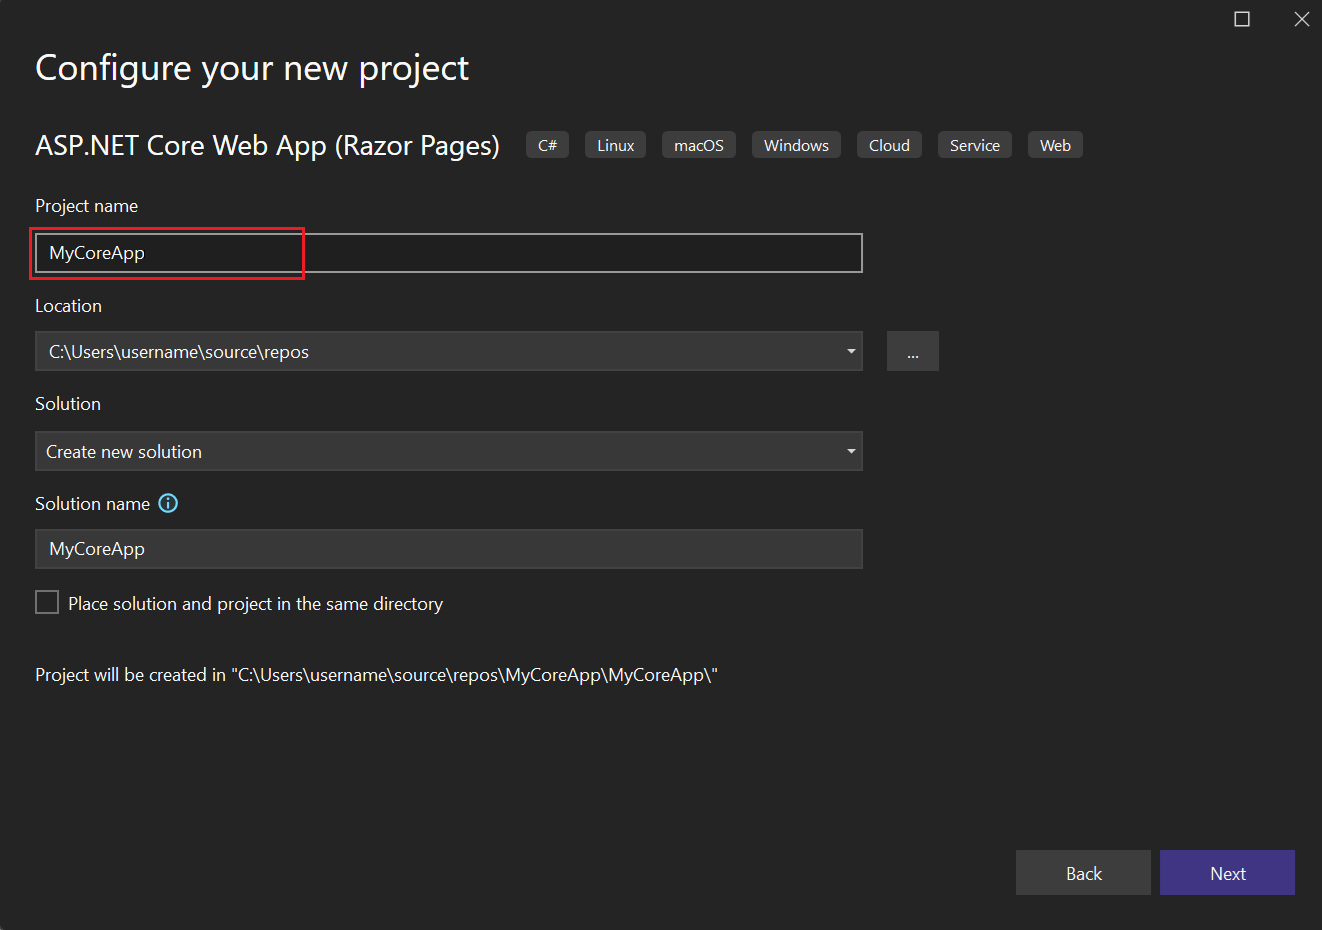 Screenshot shows the Configure your new project window with MyCoreApp entered in the Project name field.